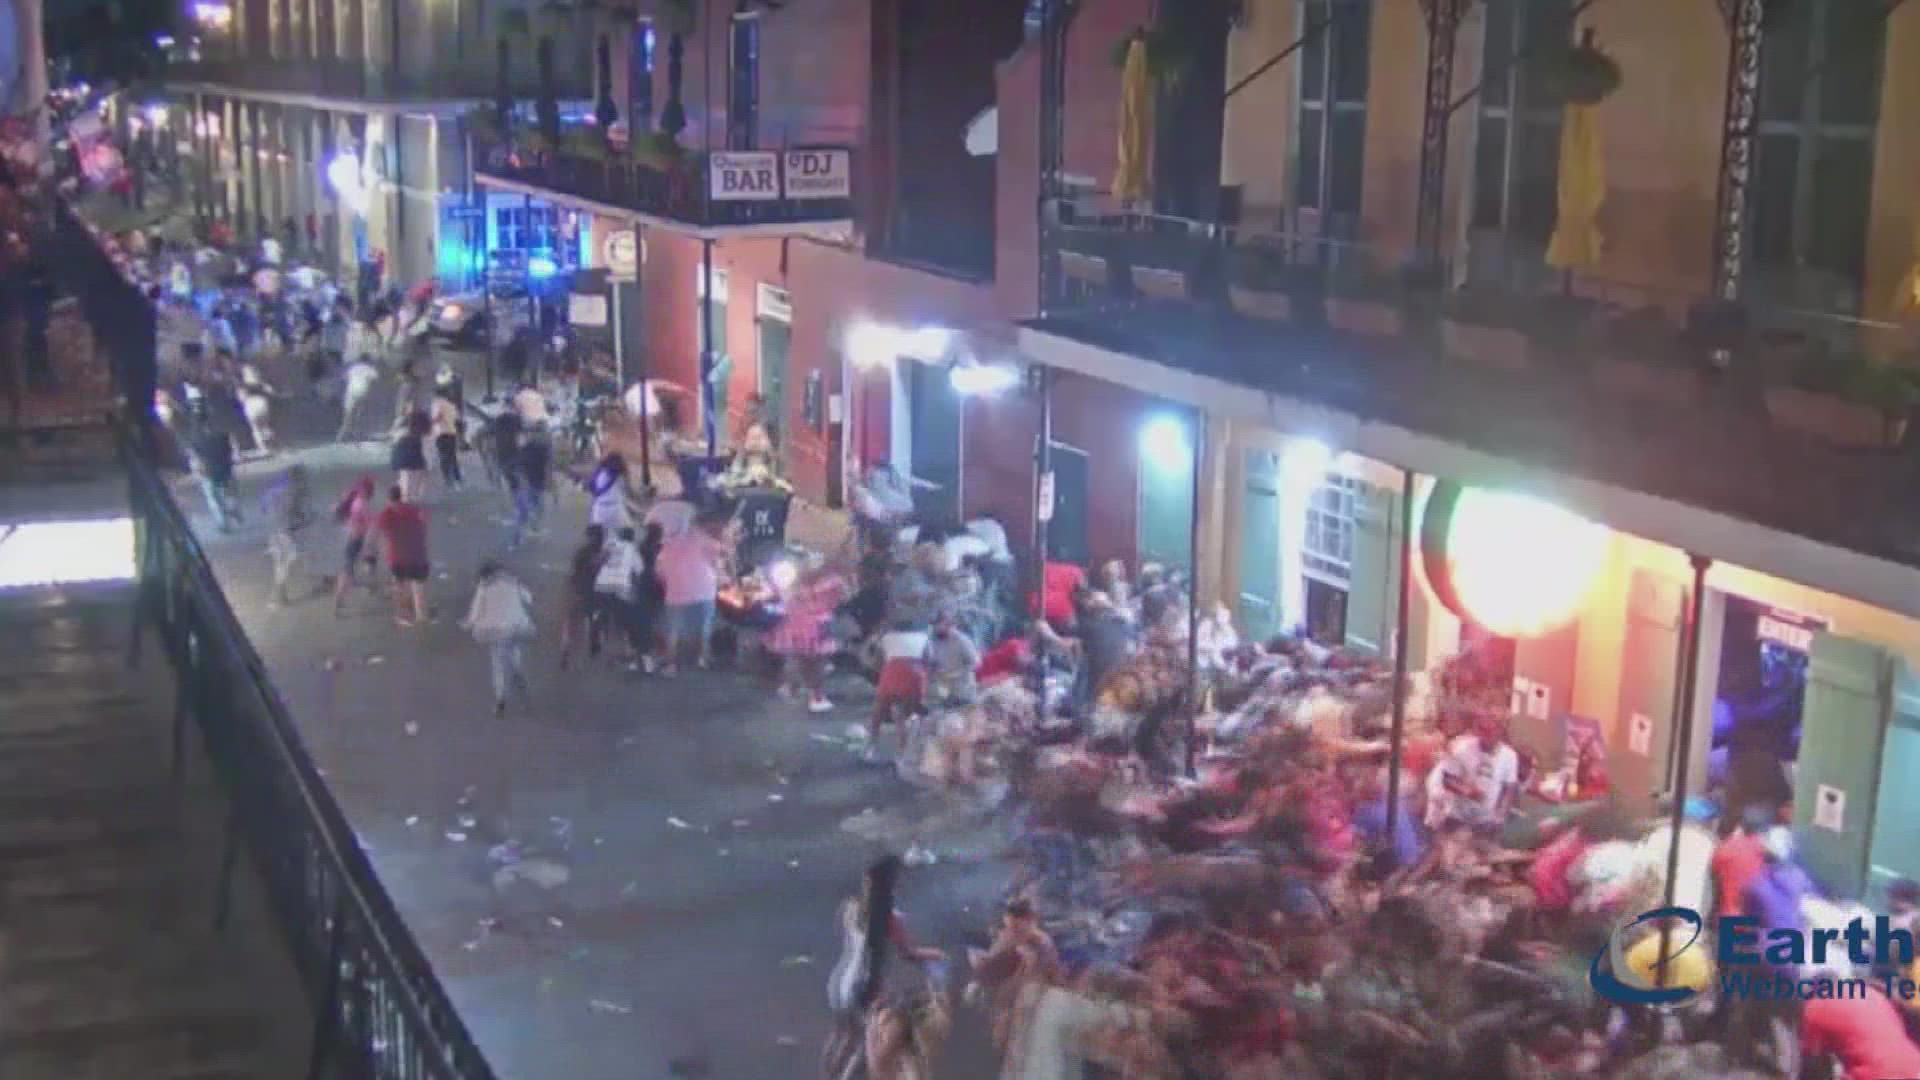 A second consecutive weekend with five people shots on Bourbon Street have some worried about safety on the iconic street.